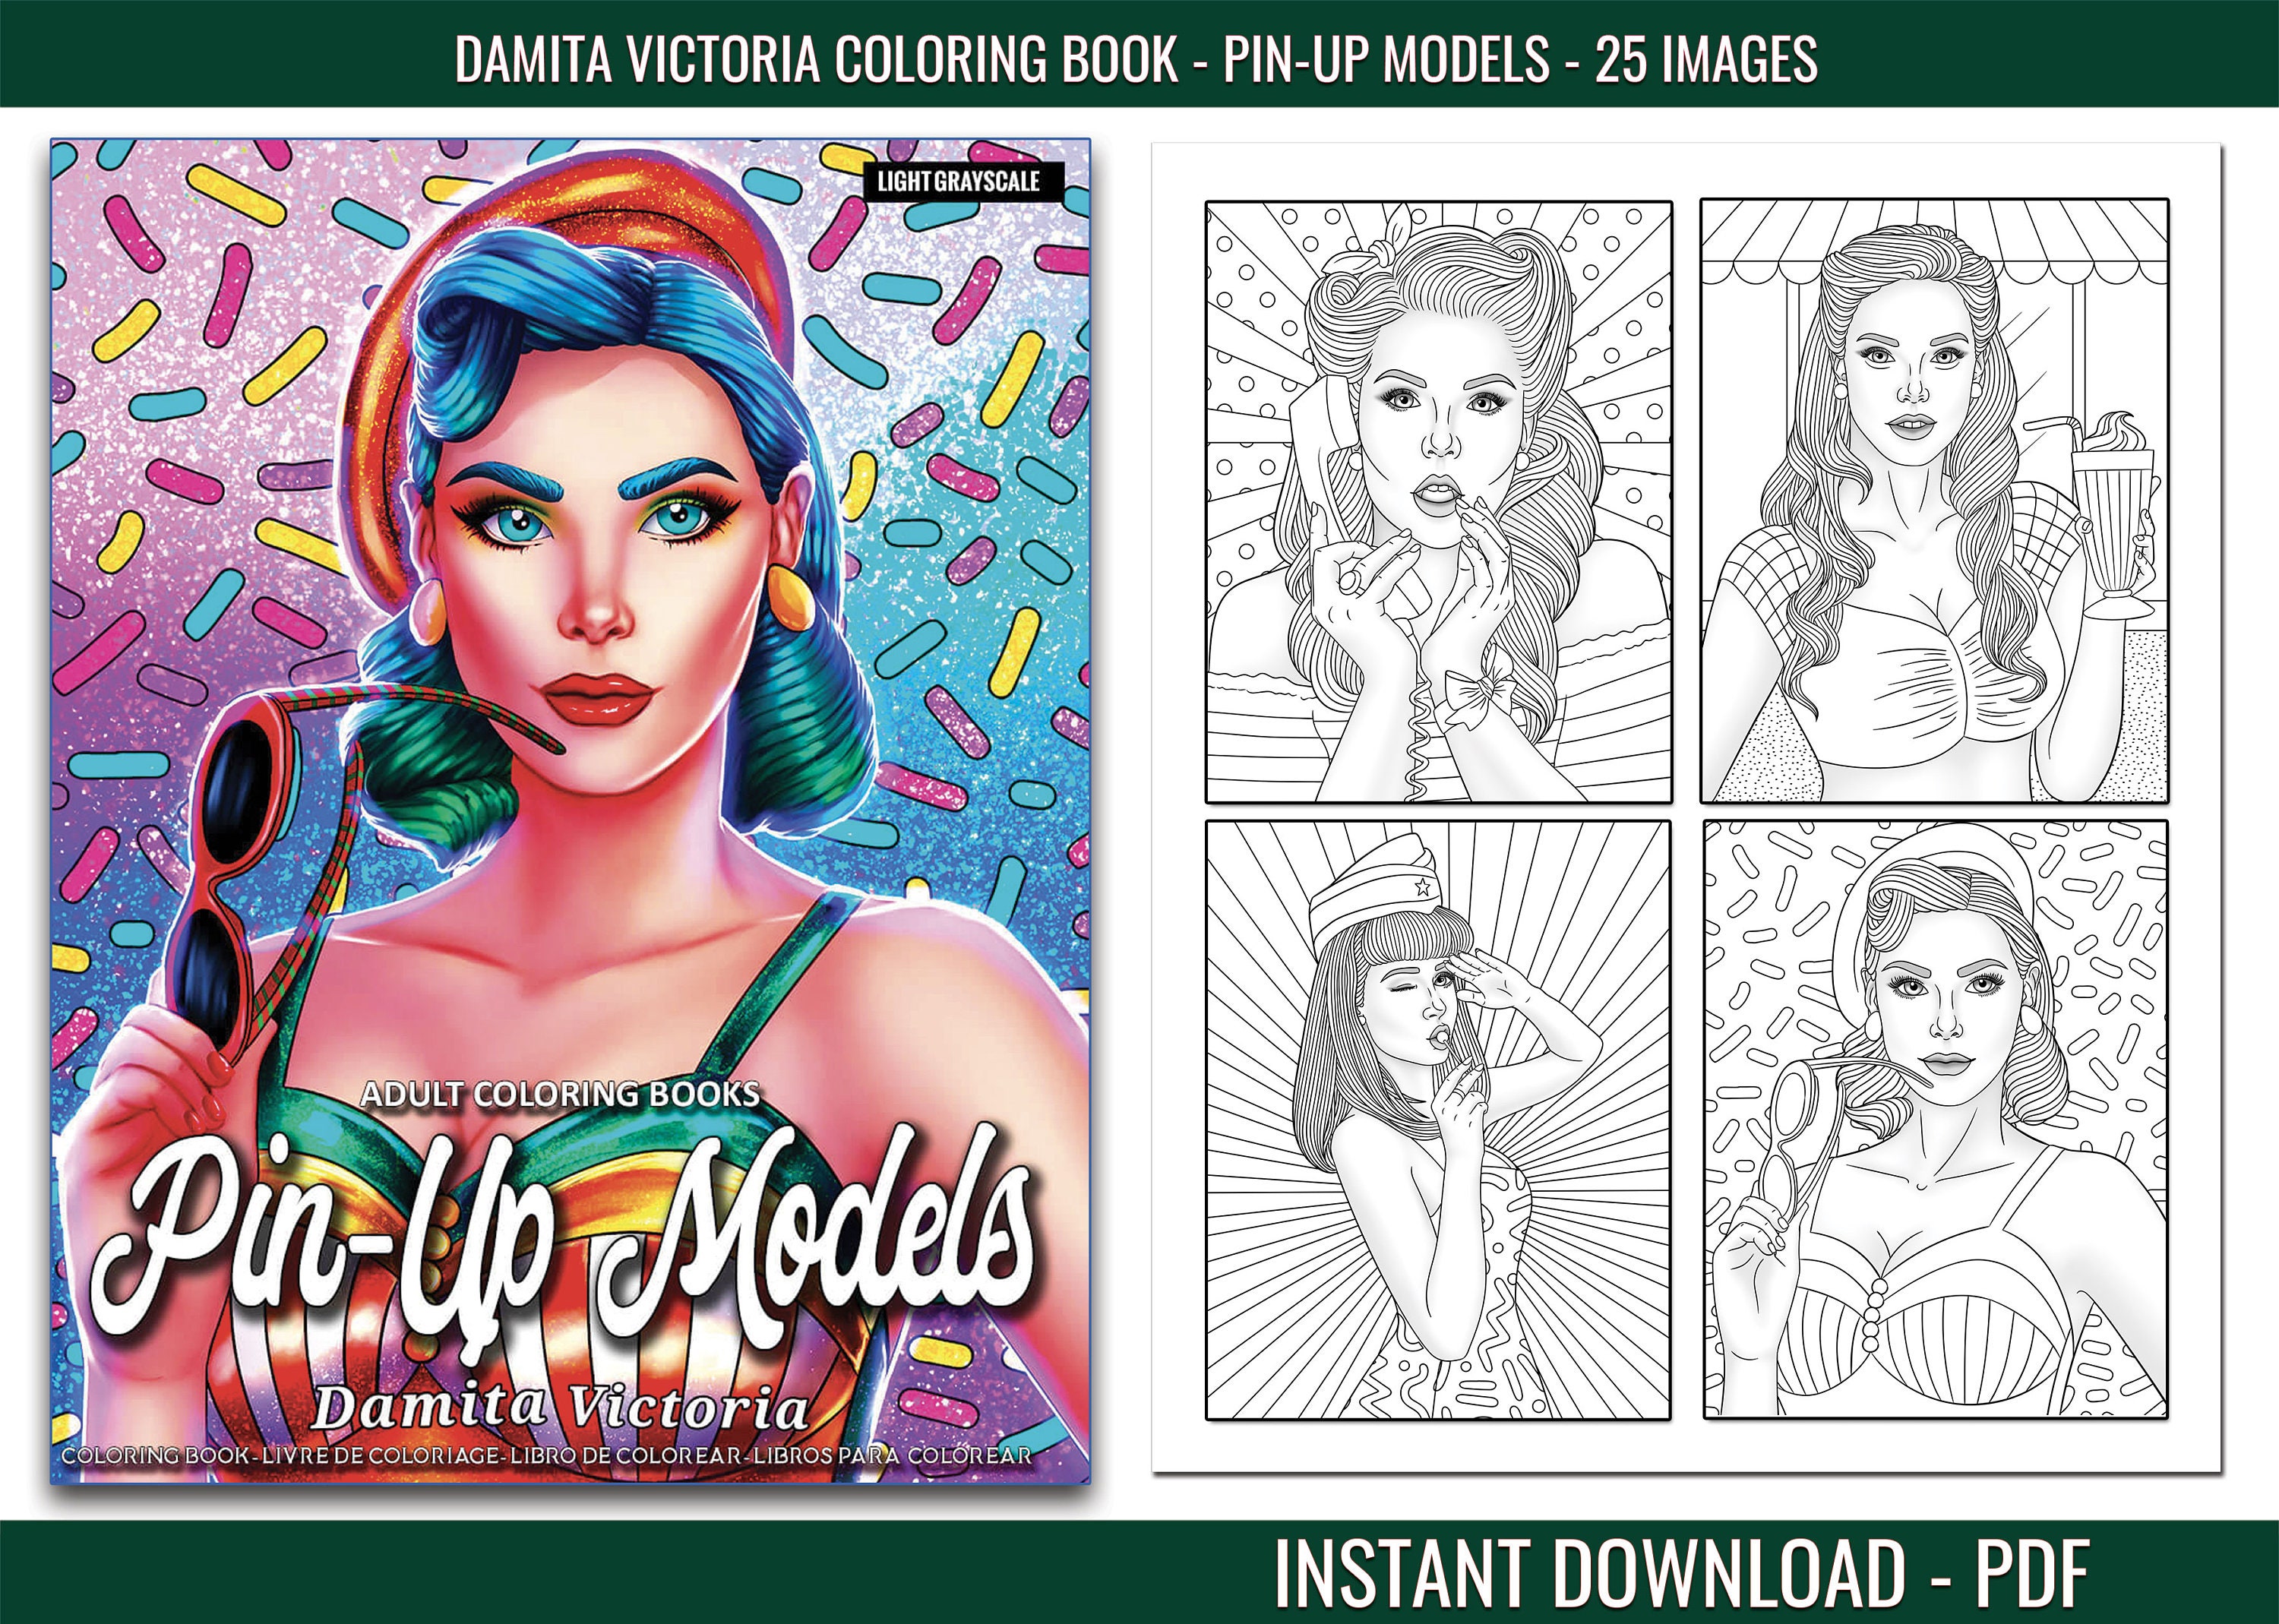 Adult Coloring Book for Women: Reclaim Your Inner DIVA